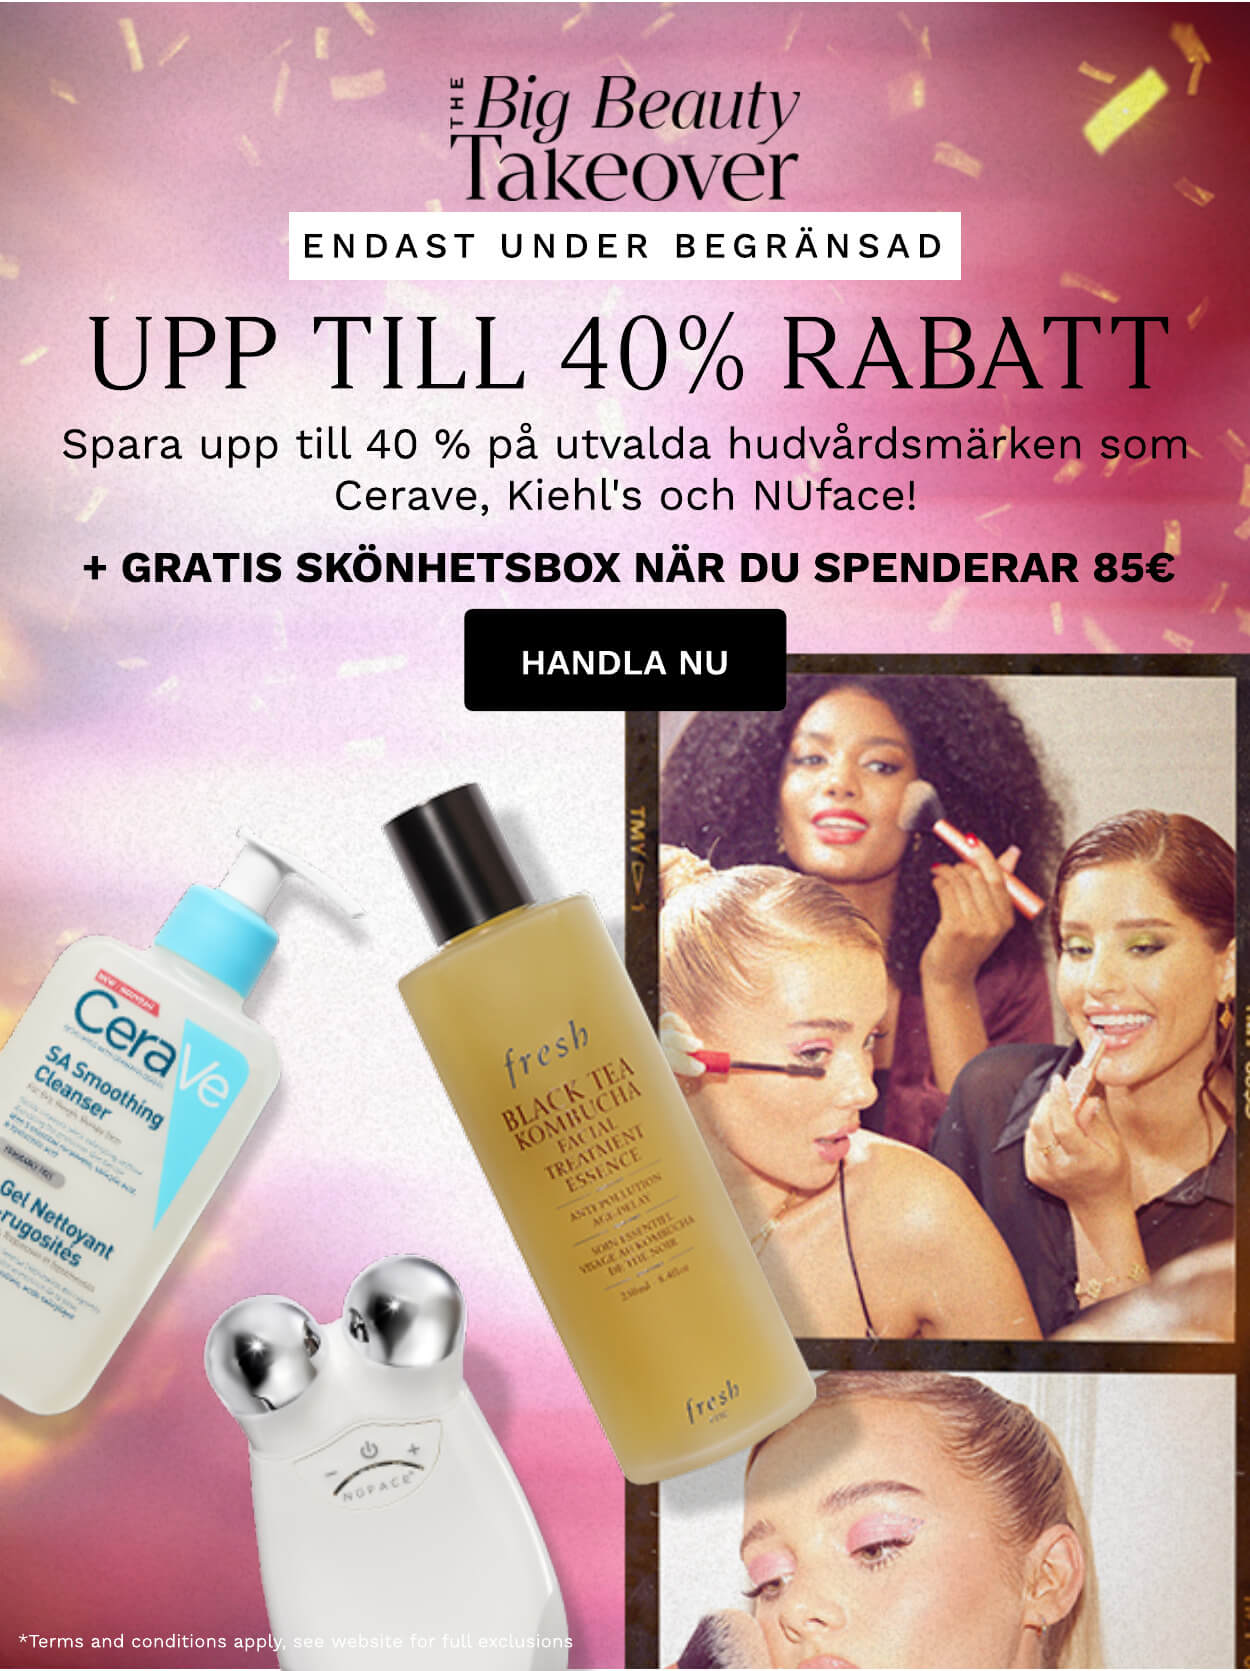 Up to 40% off + free BB when you spend 900 SEK